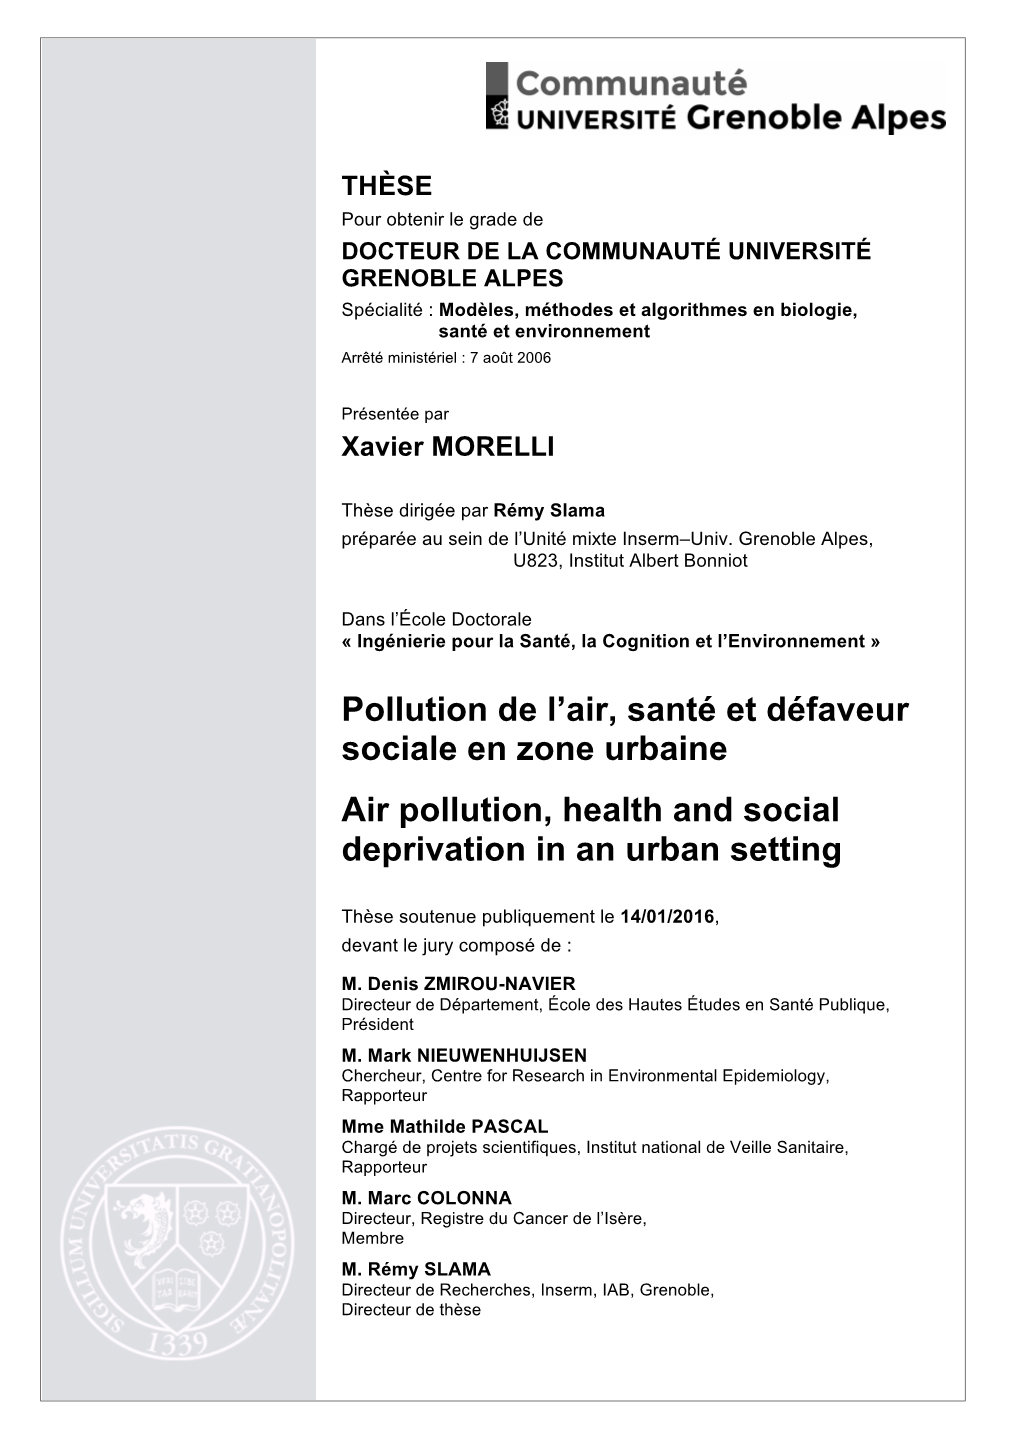 Air Pollution, Health and Social Deprivation in an Urban